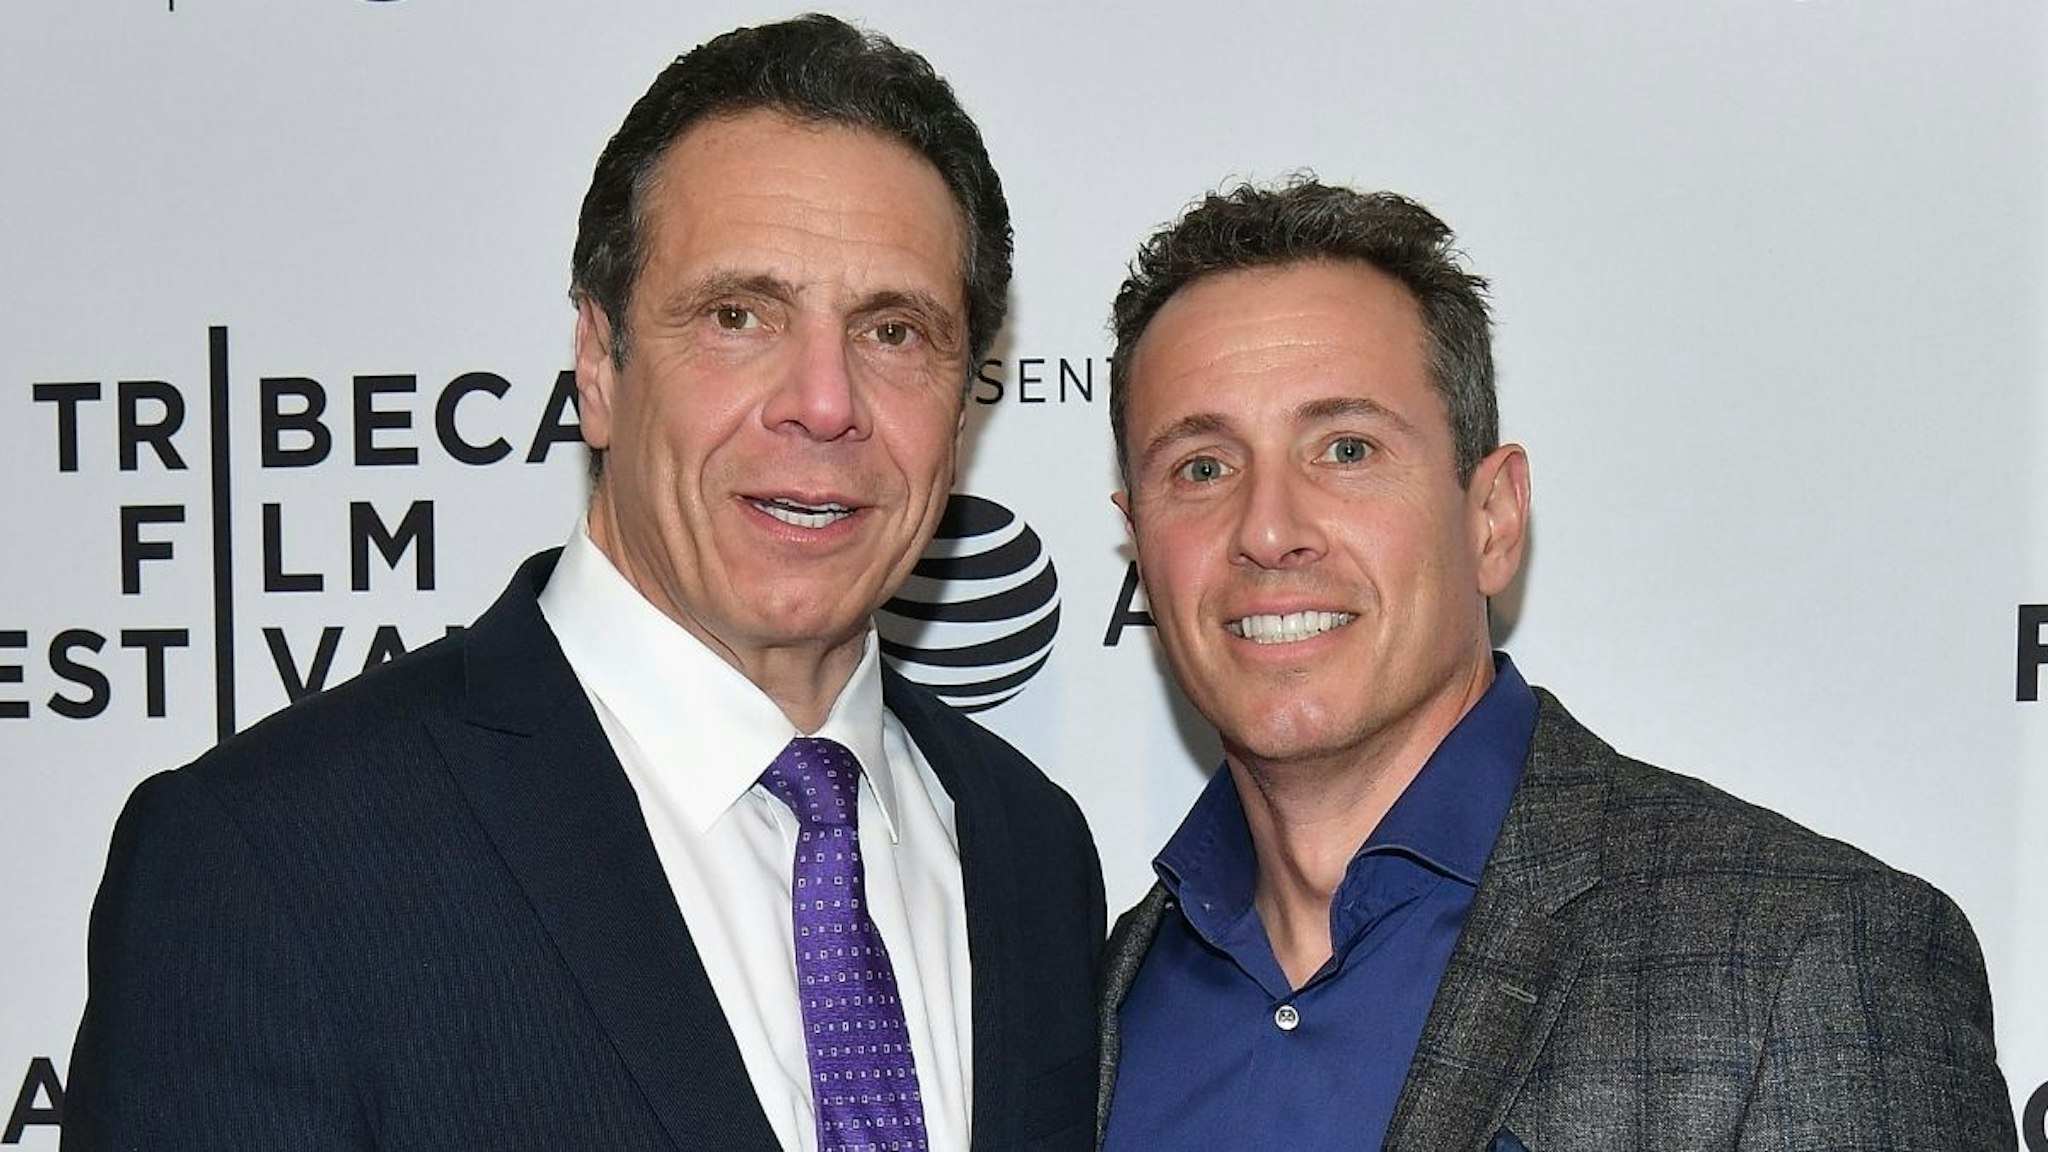 Governor of New York Andrew Cuomo and Chris Cuomo attend a screening of "RX: Early Detection A Cancer Journey With Sandra Lee" during the 2018 Tribeca Film Festiva at SVA Theatre on April 26, 2018 in New York City.